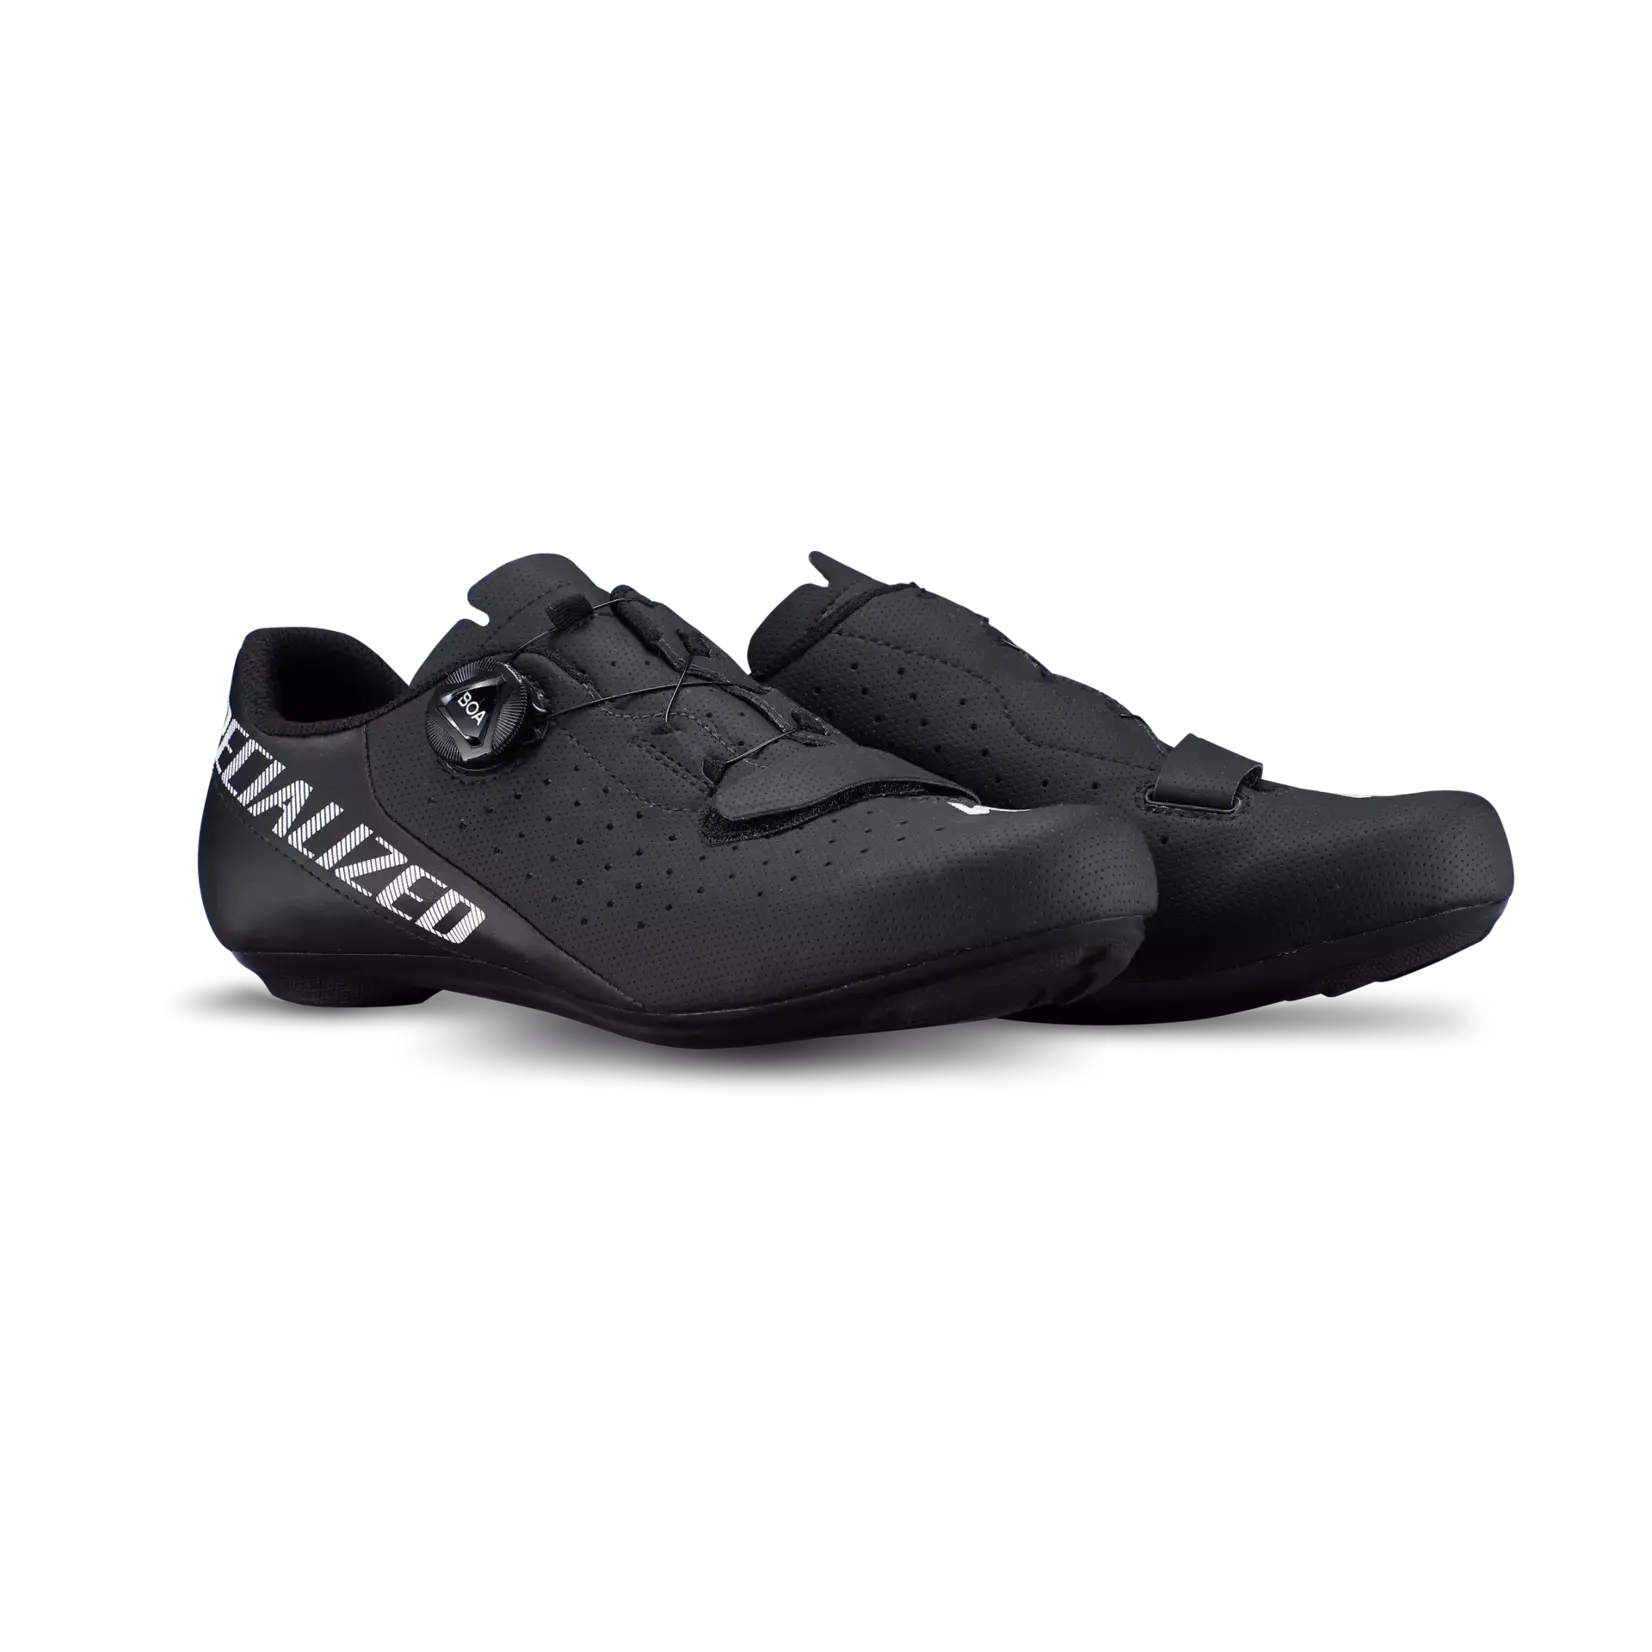 Specialized TORCH 1.0 ROAD SHOE BLACK